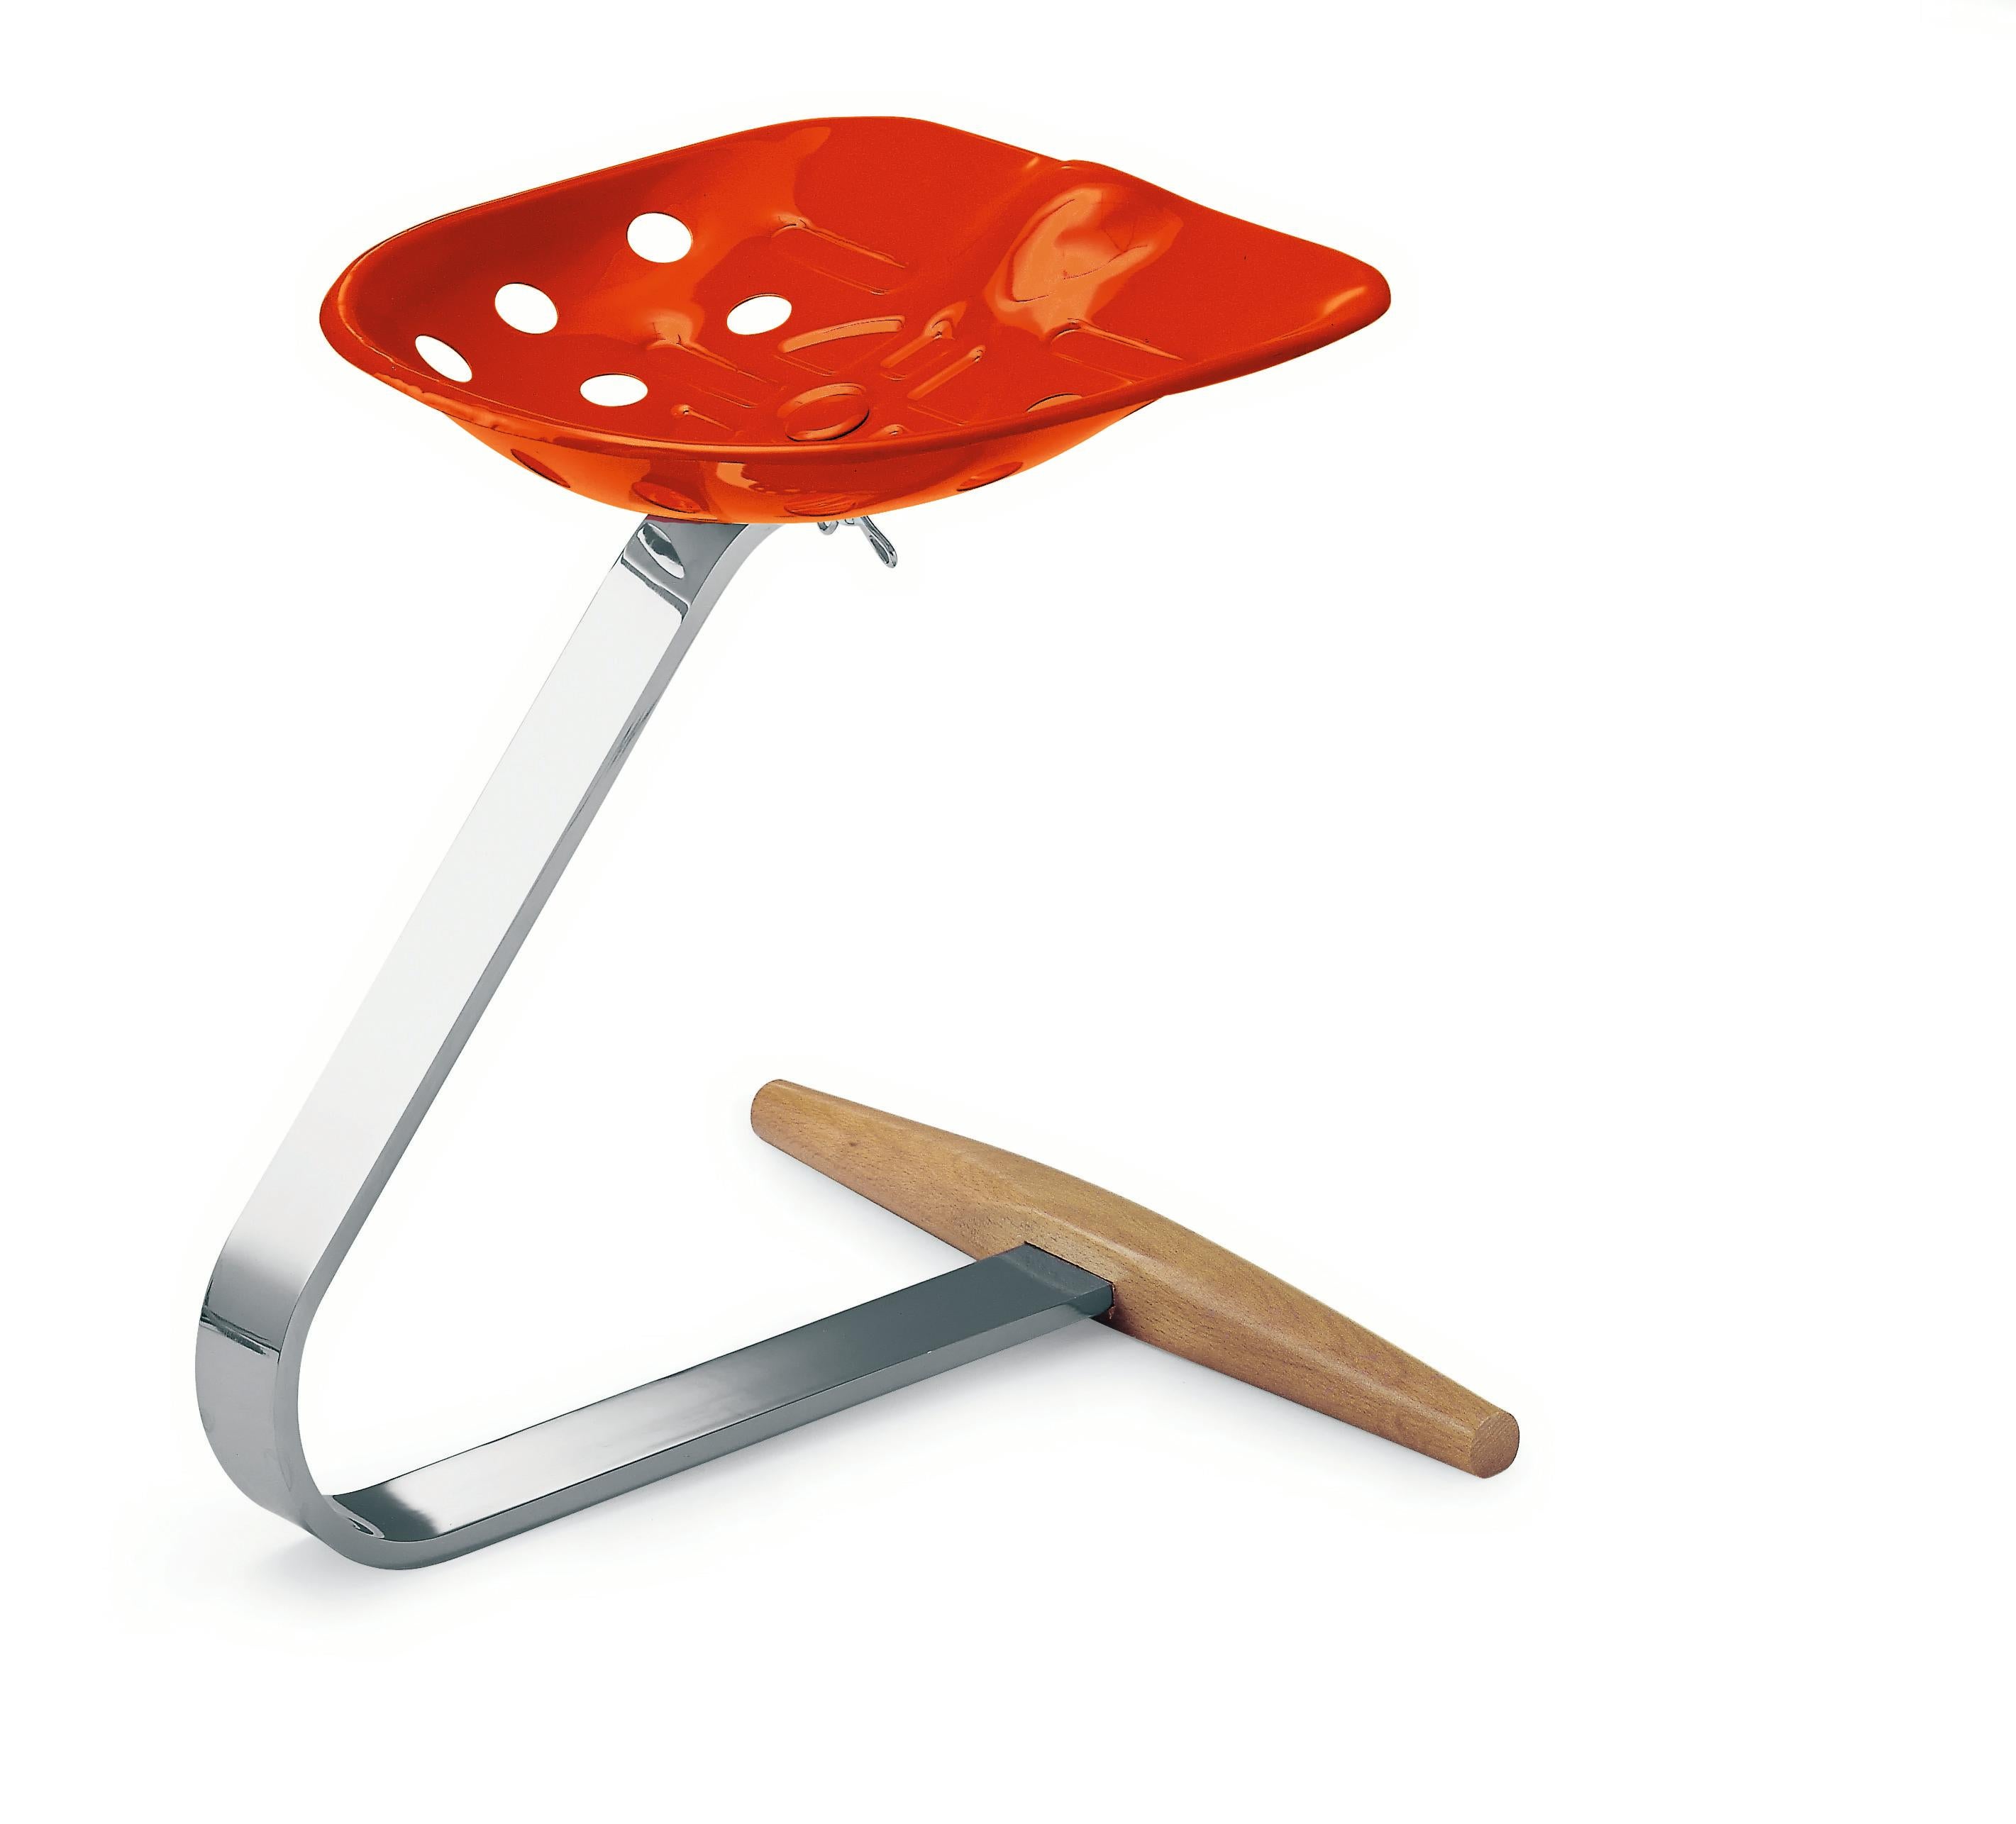 Zanotta Mezzadro Stool in Orange with Chromium Plated Steel Stem & Beech Base

Chromium-plated steel stem. Seat lacquered in the colours: orange, red, yellow, white or black. Footrest in steam-treated beech, natural colour.

How great those years